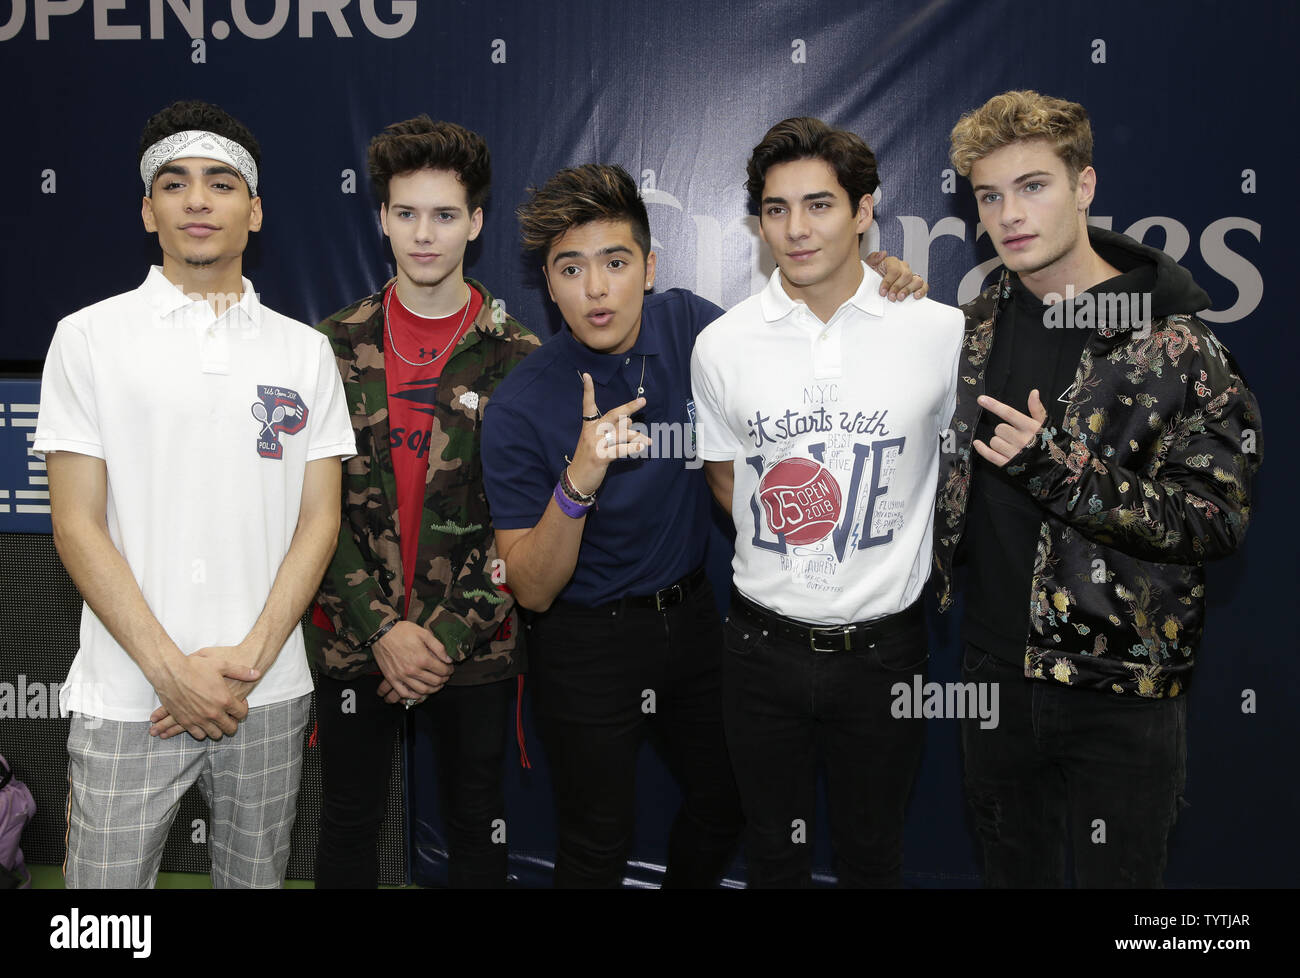 Brady Tutton, Chance Perez, Drew Ramos, Sergio Calderon, and Michael Conor of In Real Life arrive on the court for Arthur Ashe Kids Day in Arthur Ashe Stadium at the 2018 US Open Tennis Championships at the USTA Billie Jean King National Tennis Center in New York City on August 25, 2018.        Photo by John Angelillo/UPI Stock Photo